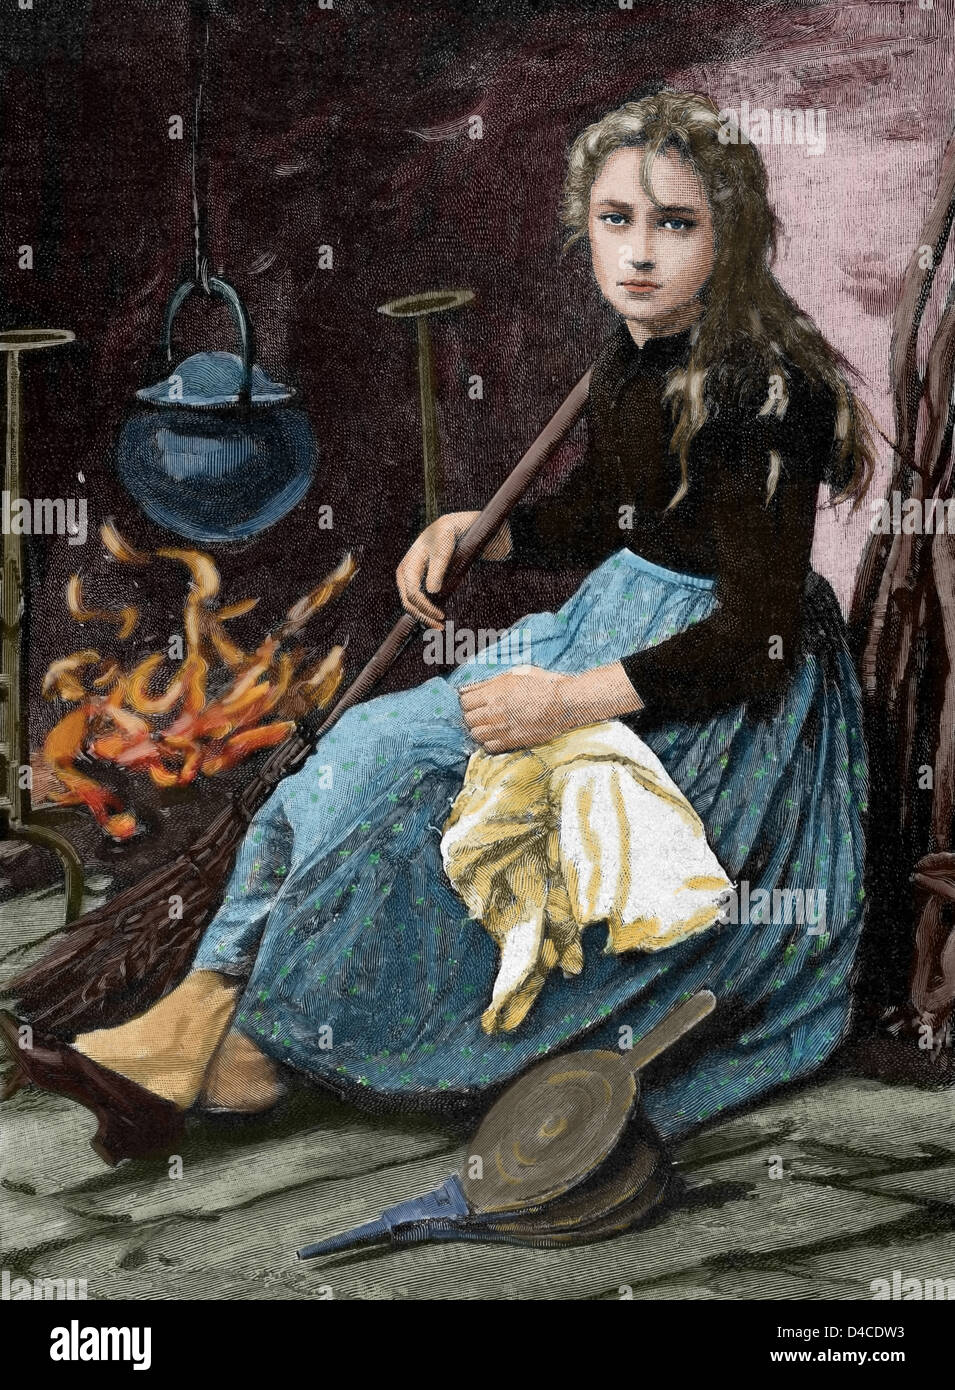 Cinderella. Character in the tale written by Charles Perrault. Engraving in The Iberian Illustration, 1891. Colored. Stock Photo